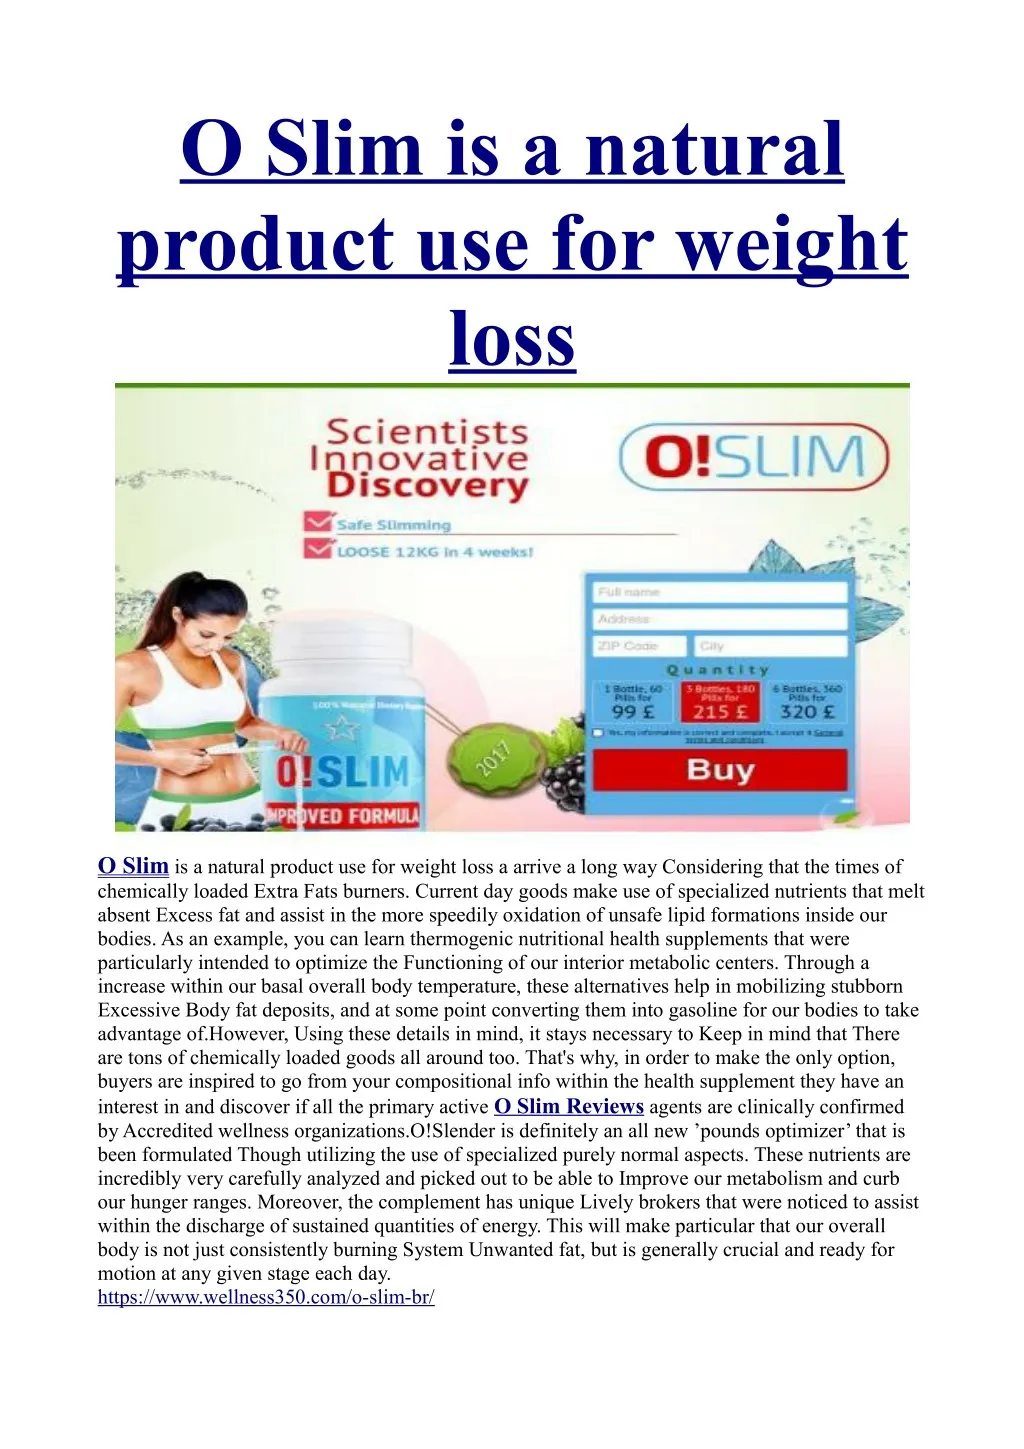 o slim is a natural product use for weight loss